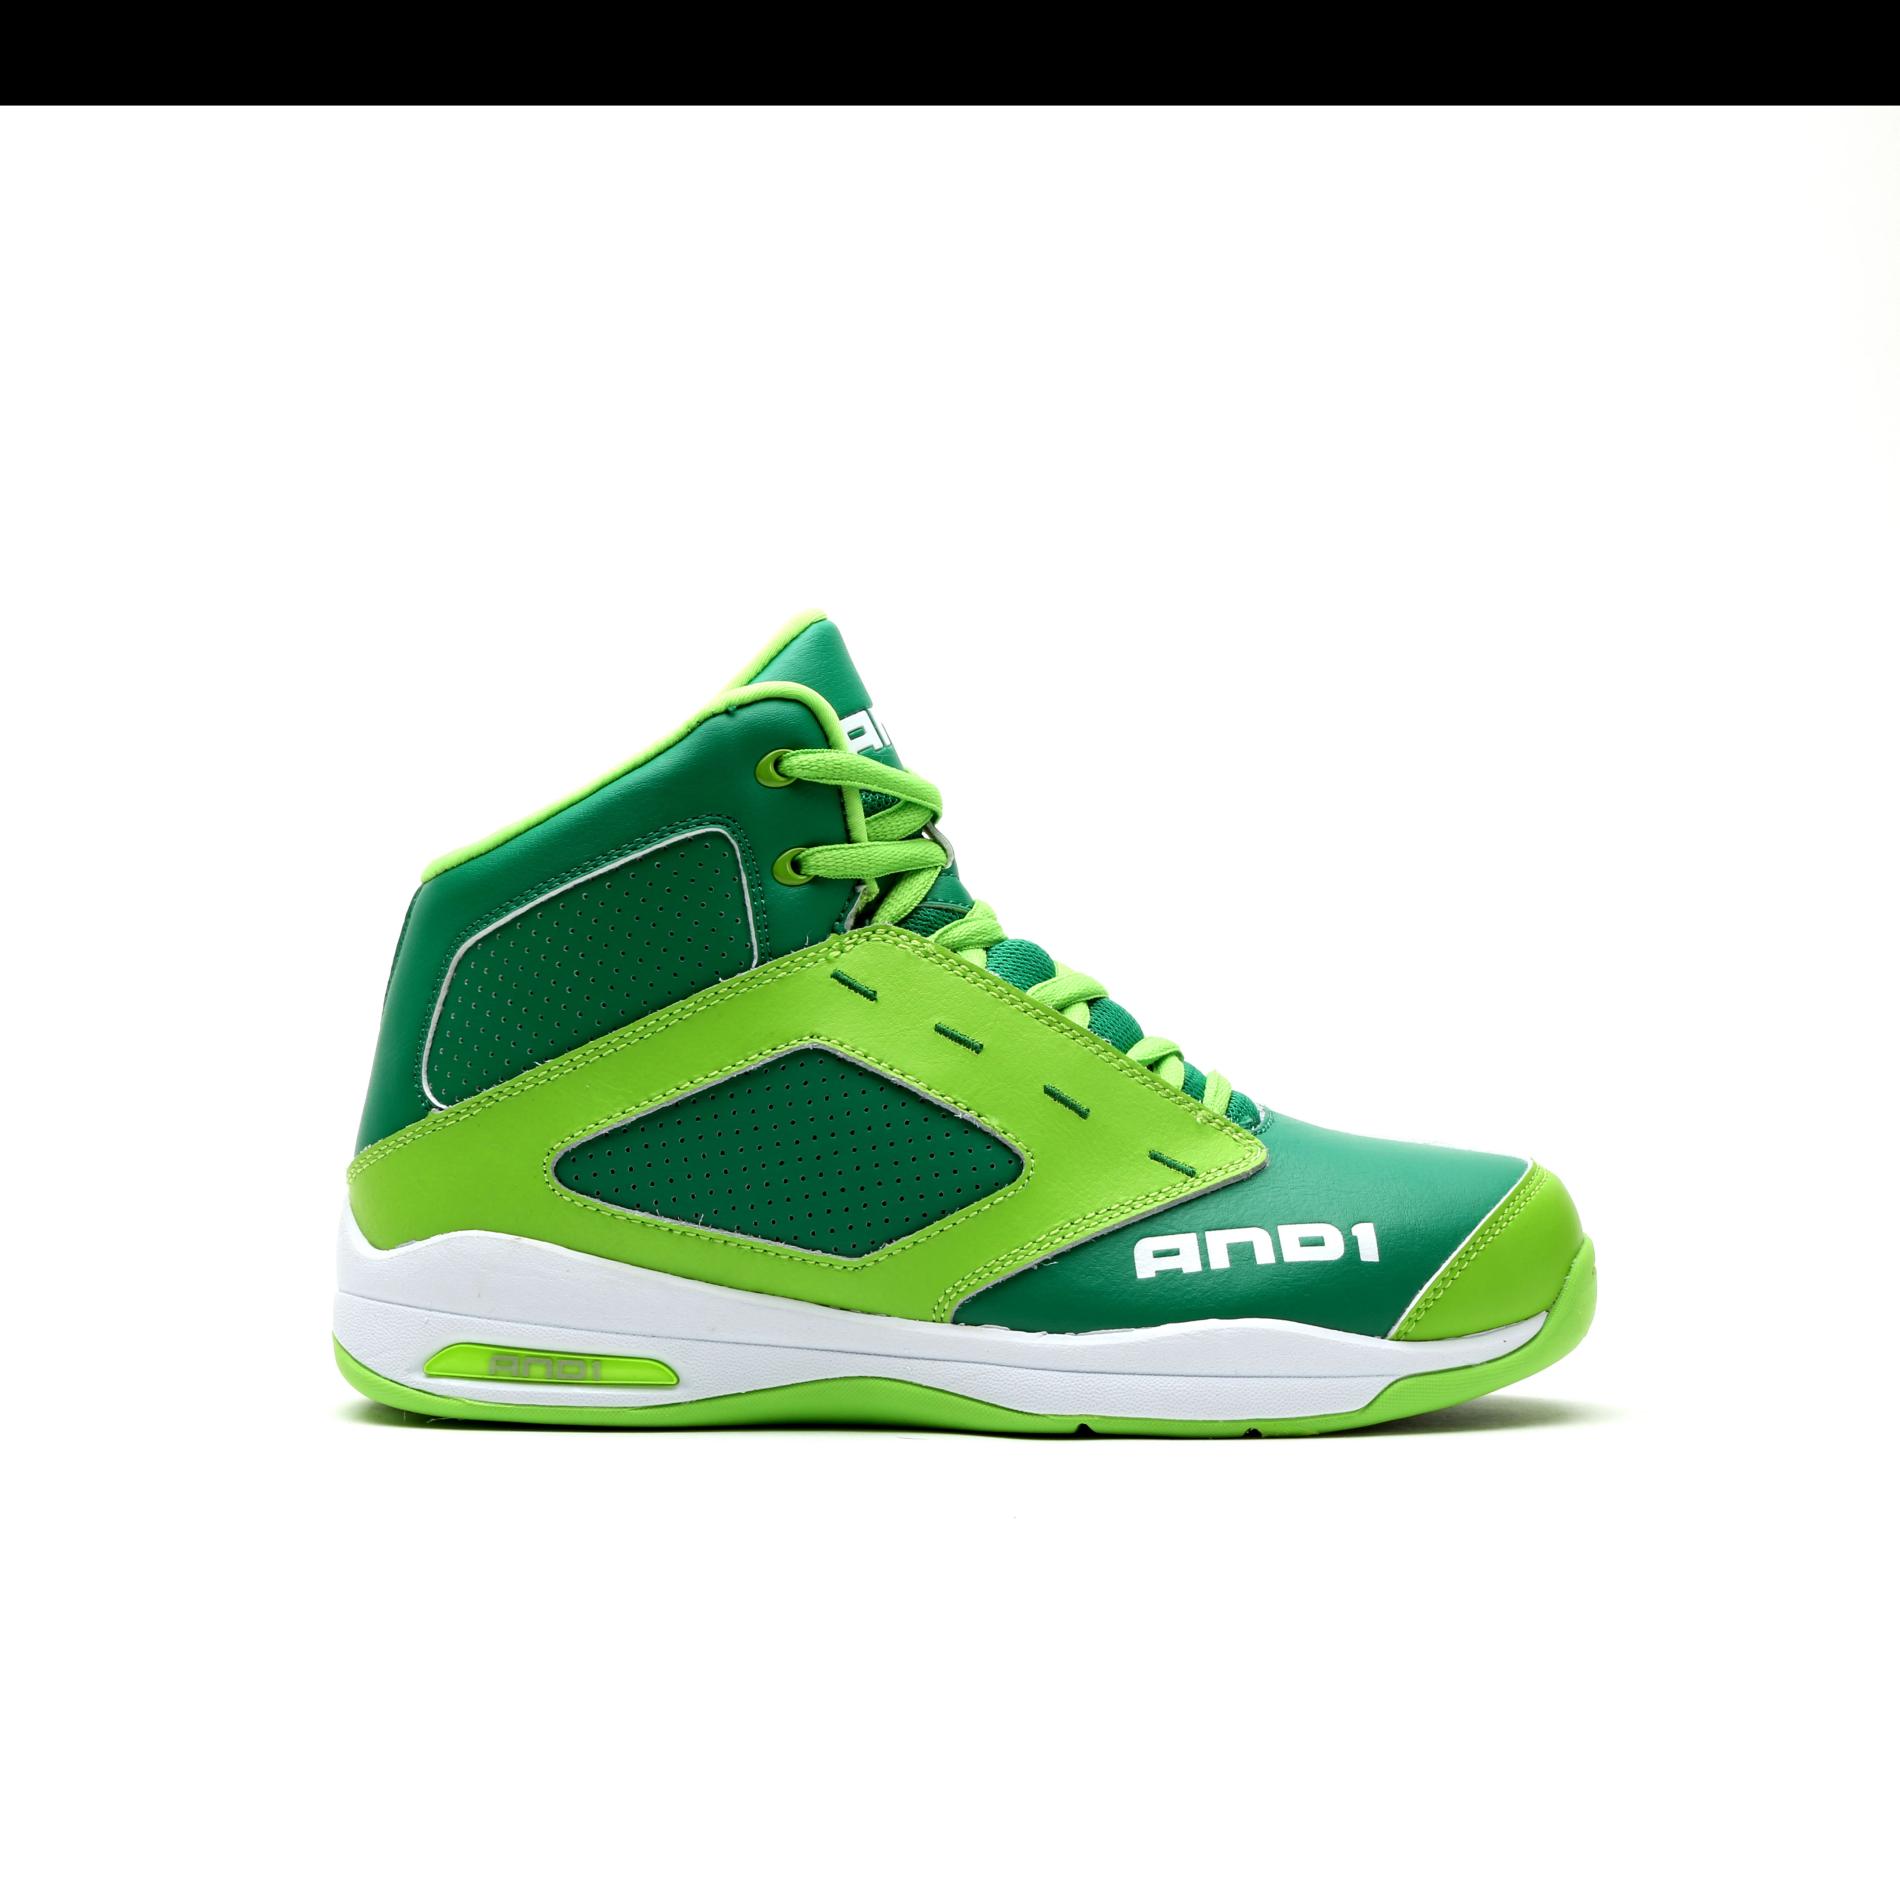 AND 1 Boy's Typhoon Green High-Top Athletic Shoe